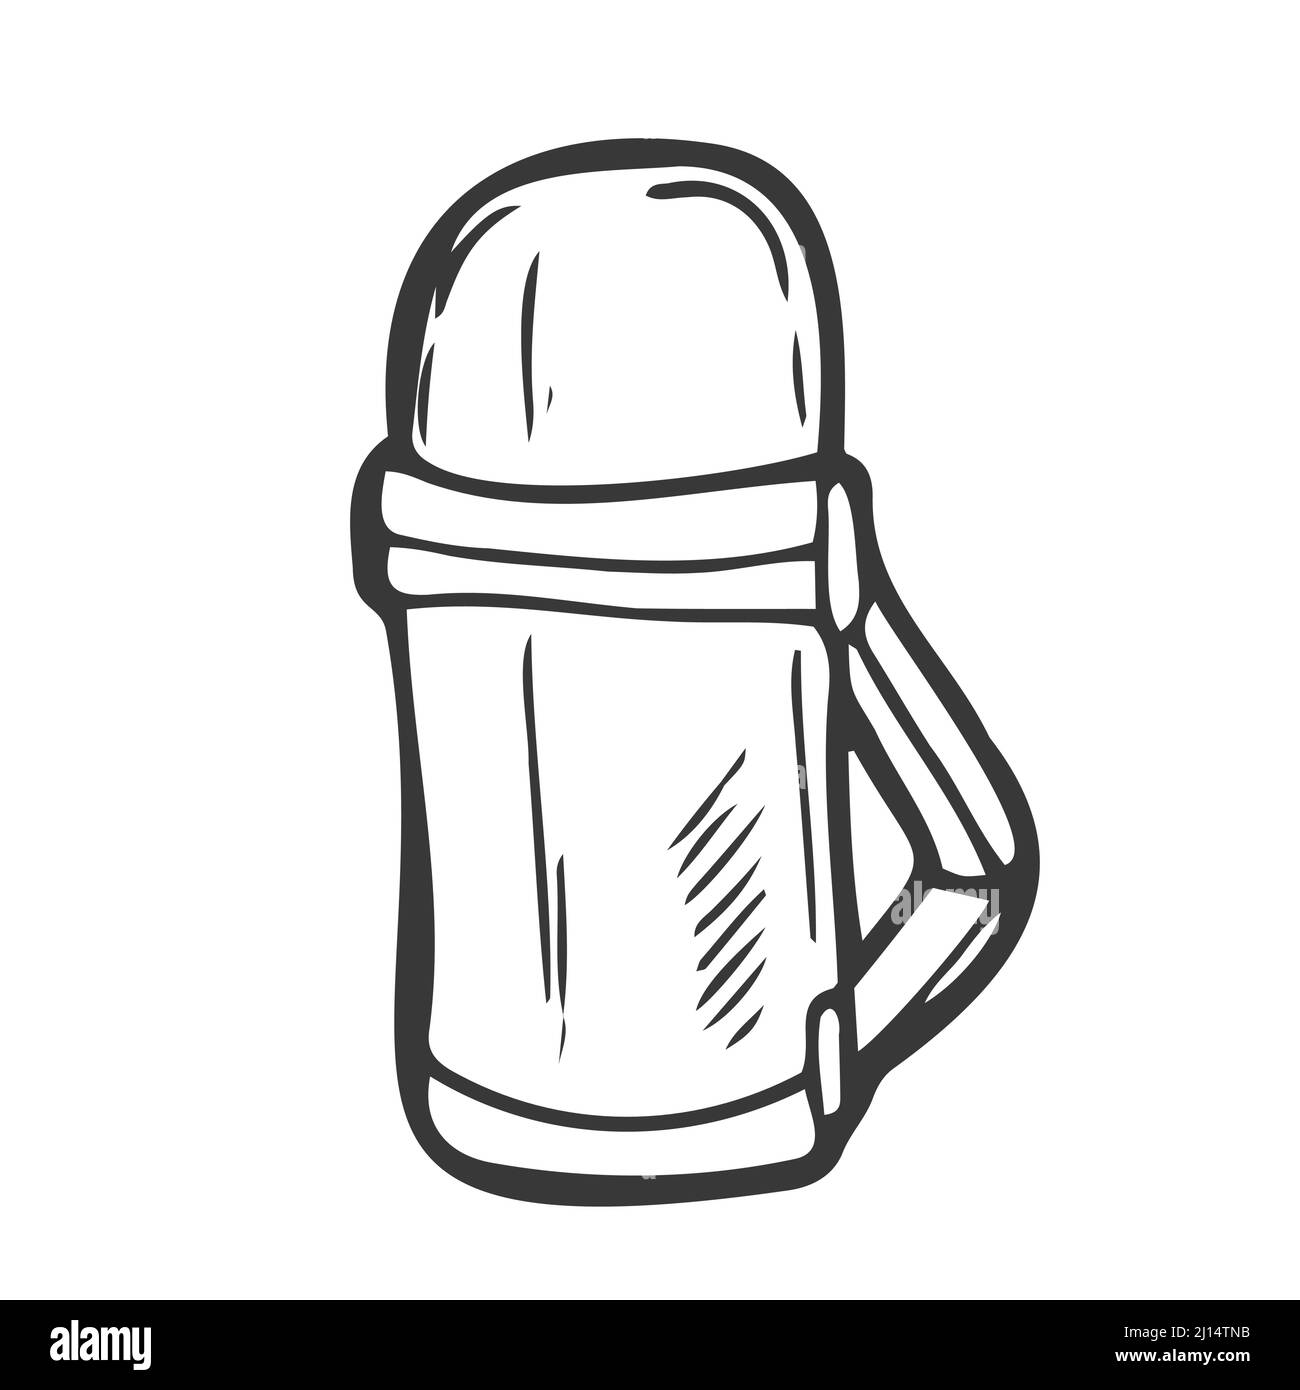 https://c8.alamy.com/comp/2J14TNB/thermos-hand-drawn-outline-doodle-icon-vector-sketch-illustration-of-thermos-for-print-web-2J14TNB.jpg